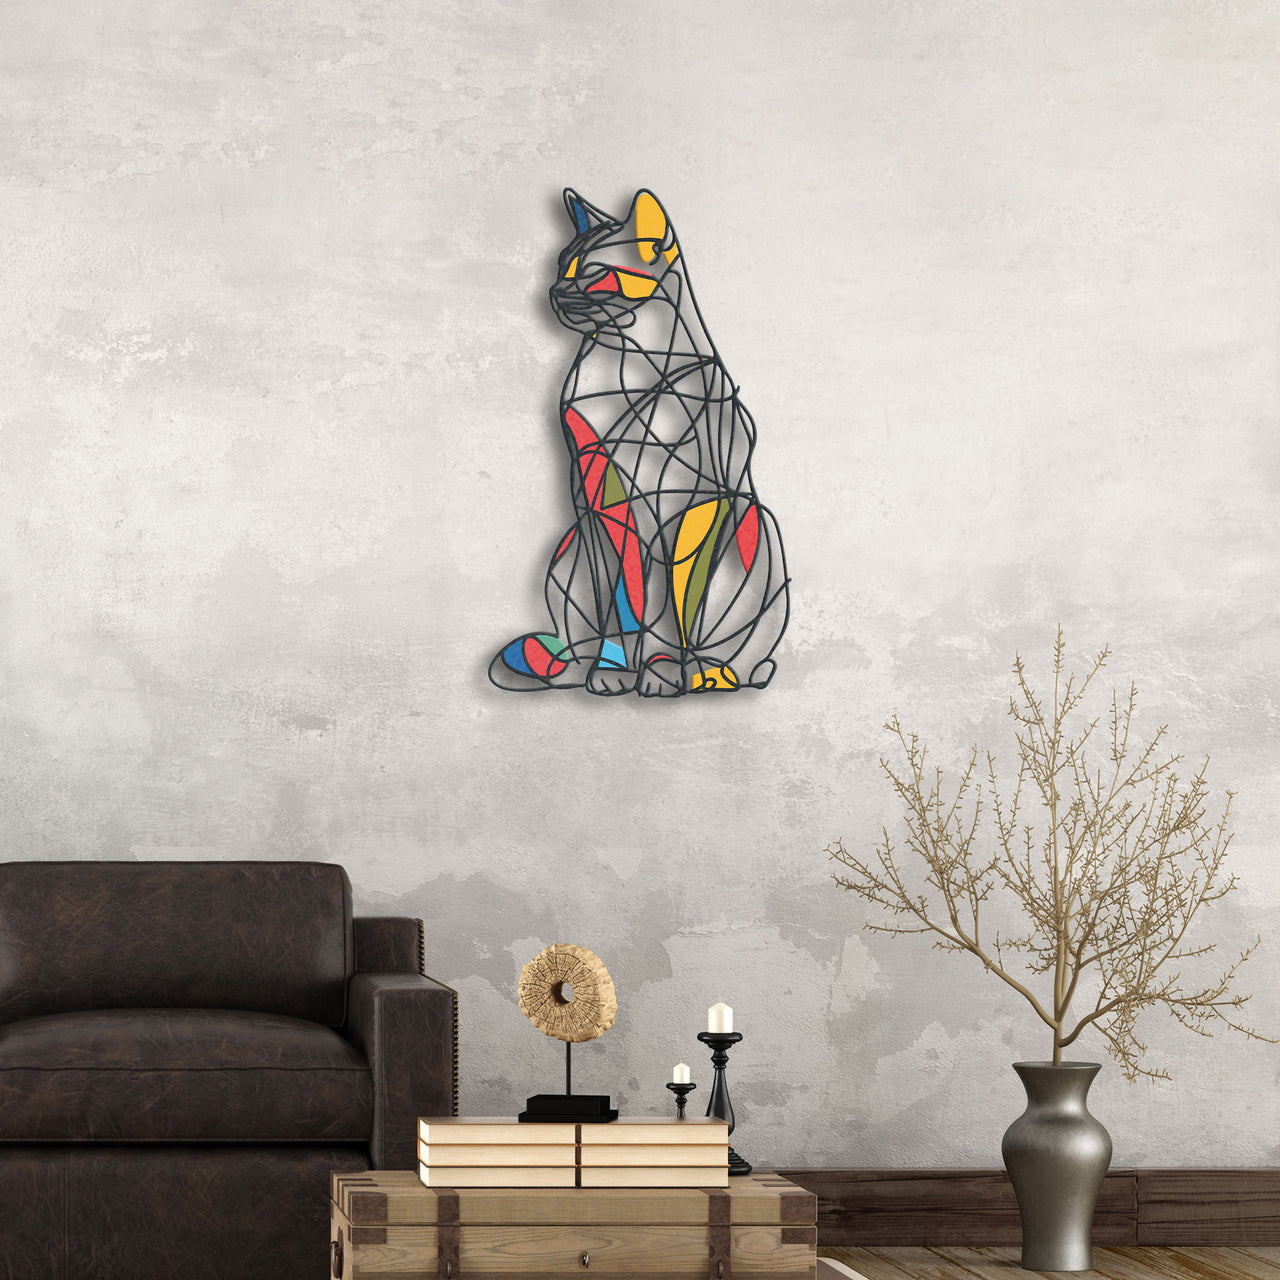 Metal Wall Art Abstract Cat, Contemporary Home Decor, Stylish Accent Piece, Unique Gift for Cat Aficionados